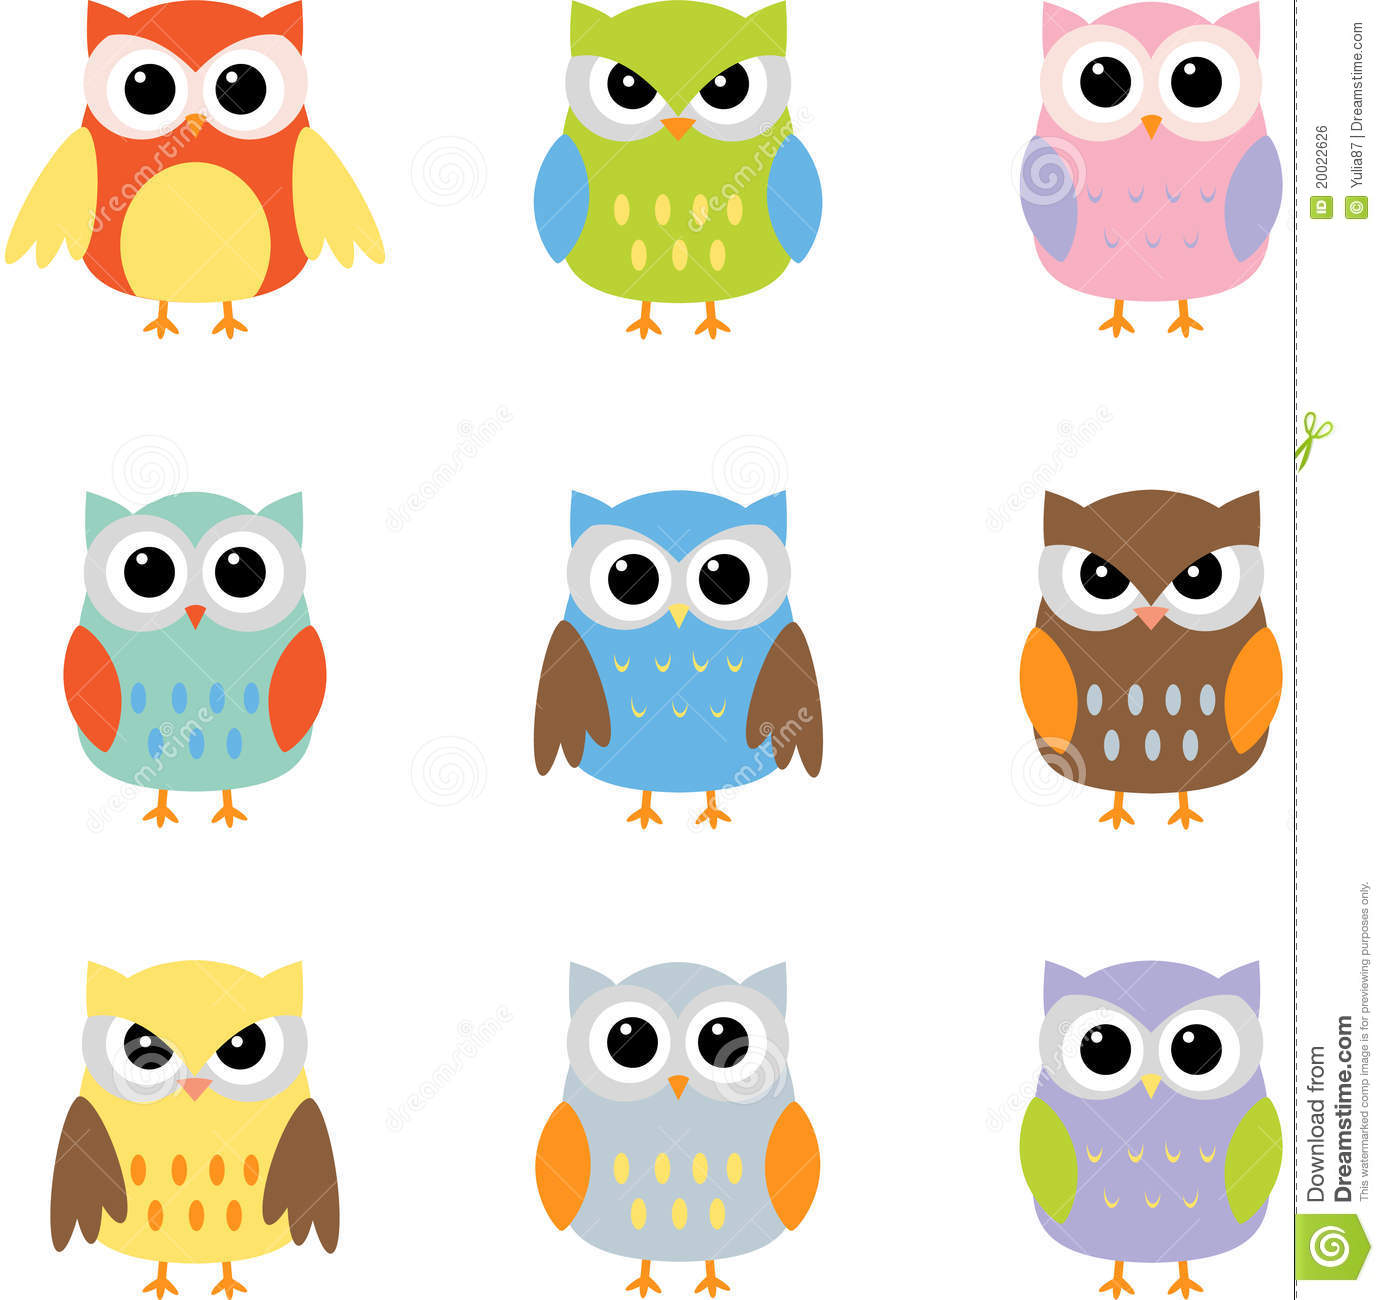 Color Owls Clip Art Royalty Free Stock Image.